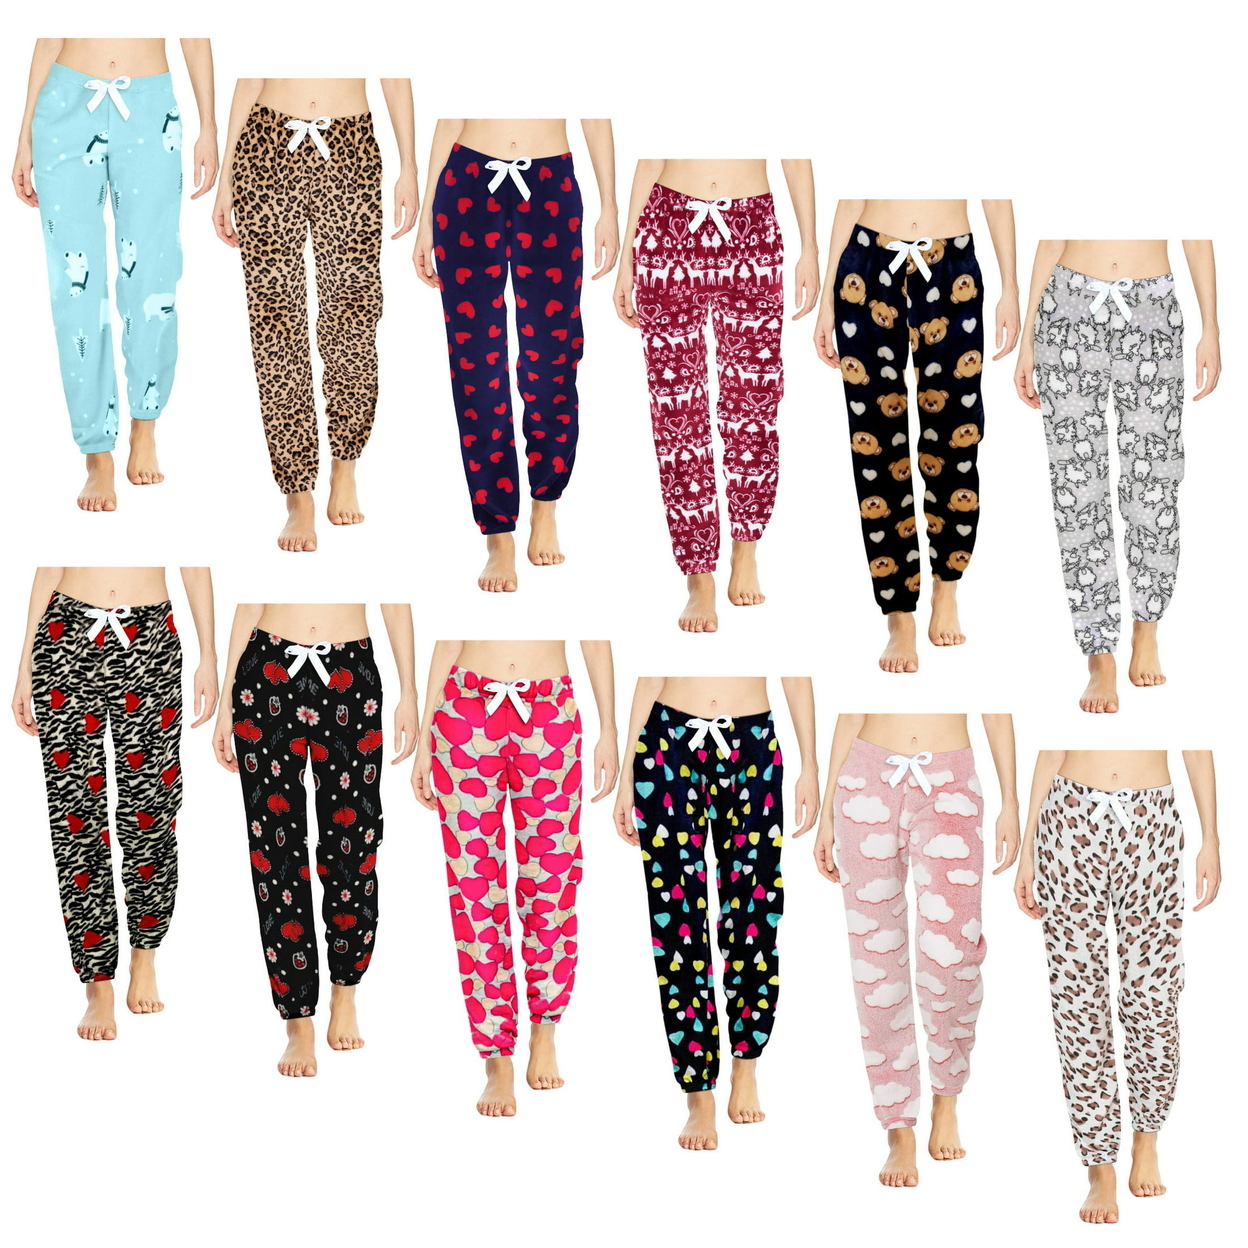 Multi-Pack: Women's Printed Ultra-Soft Comfy Stretch Micro-Fleece Pajama Lounge Pants - 1-pack, Animal, Small